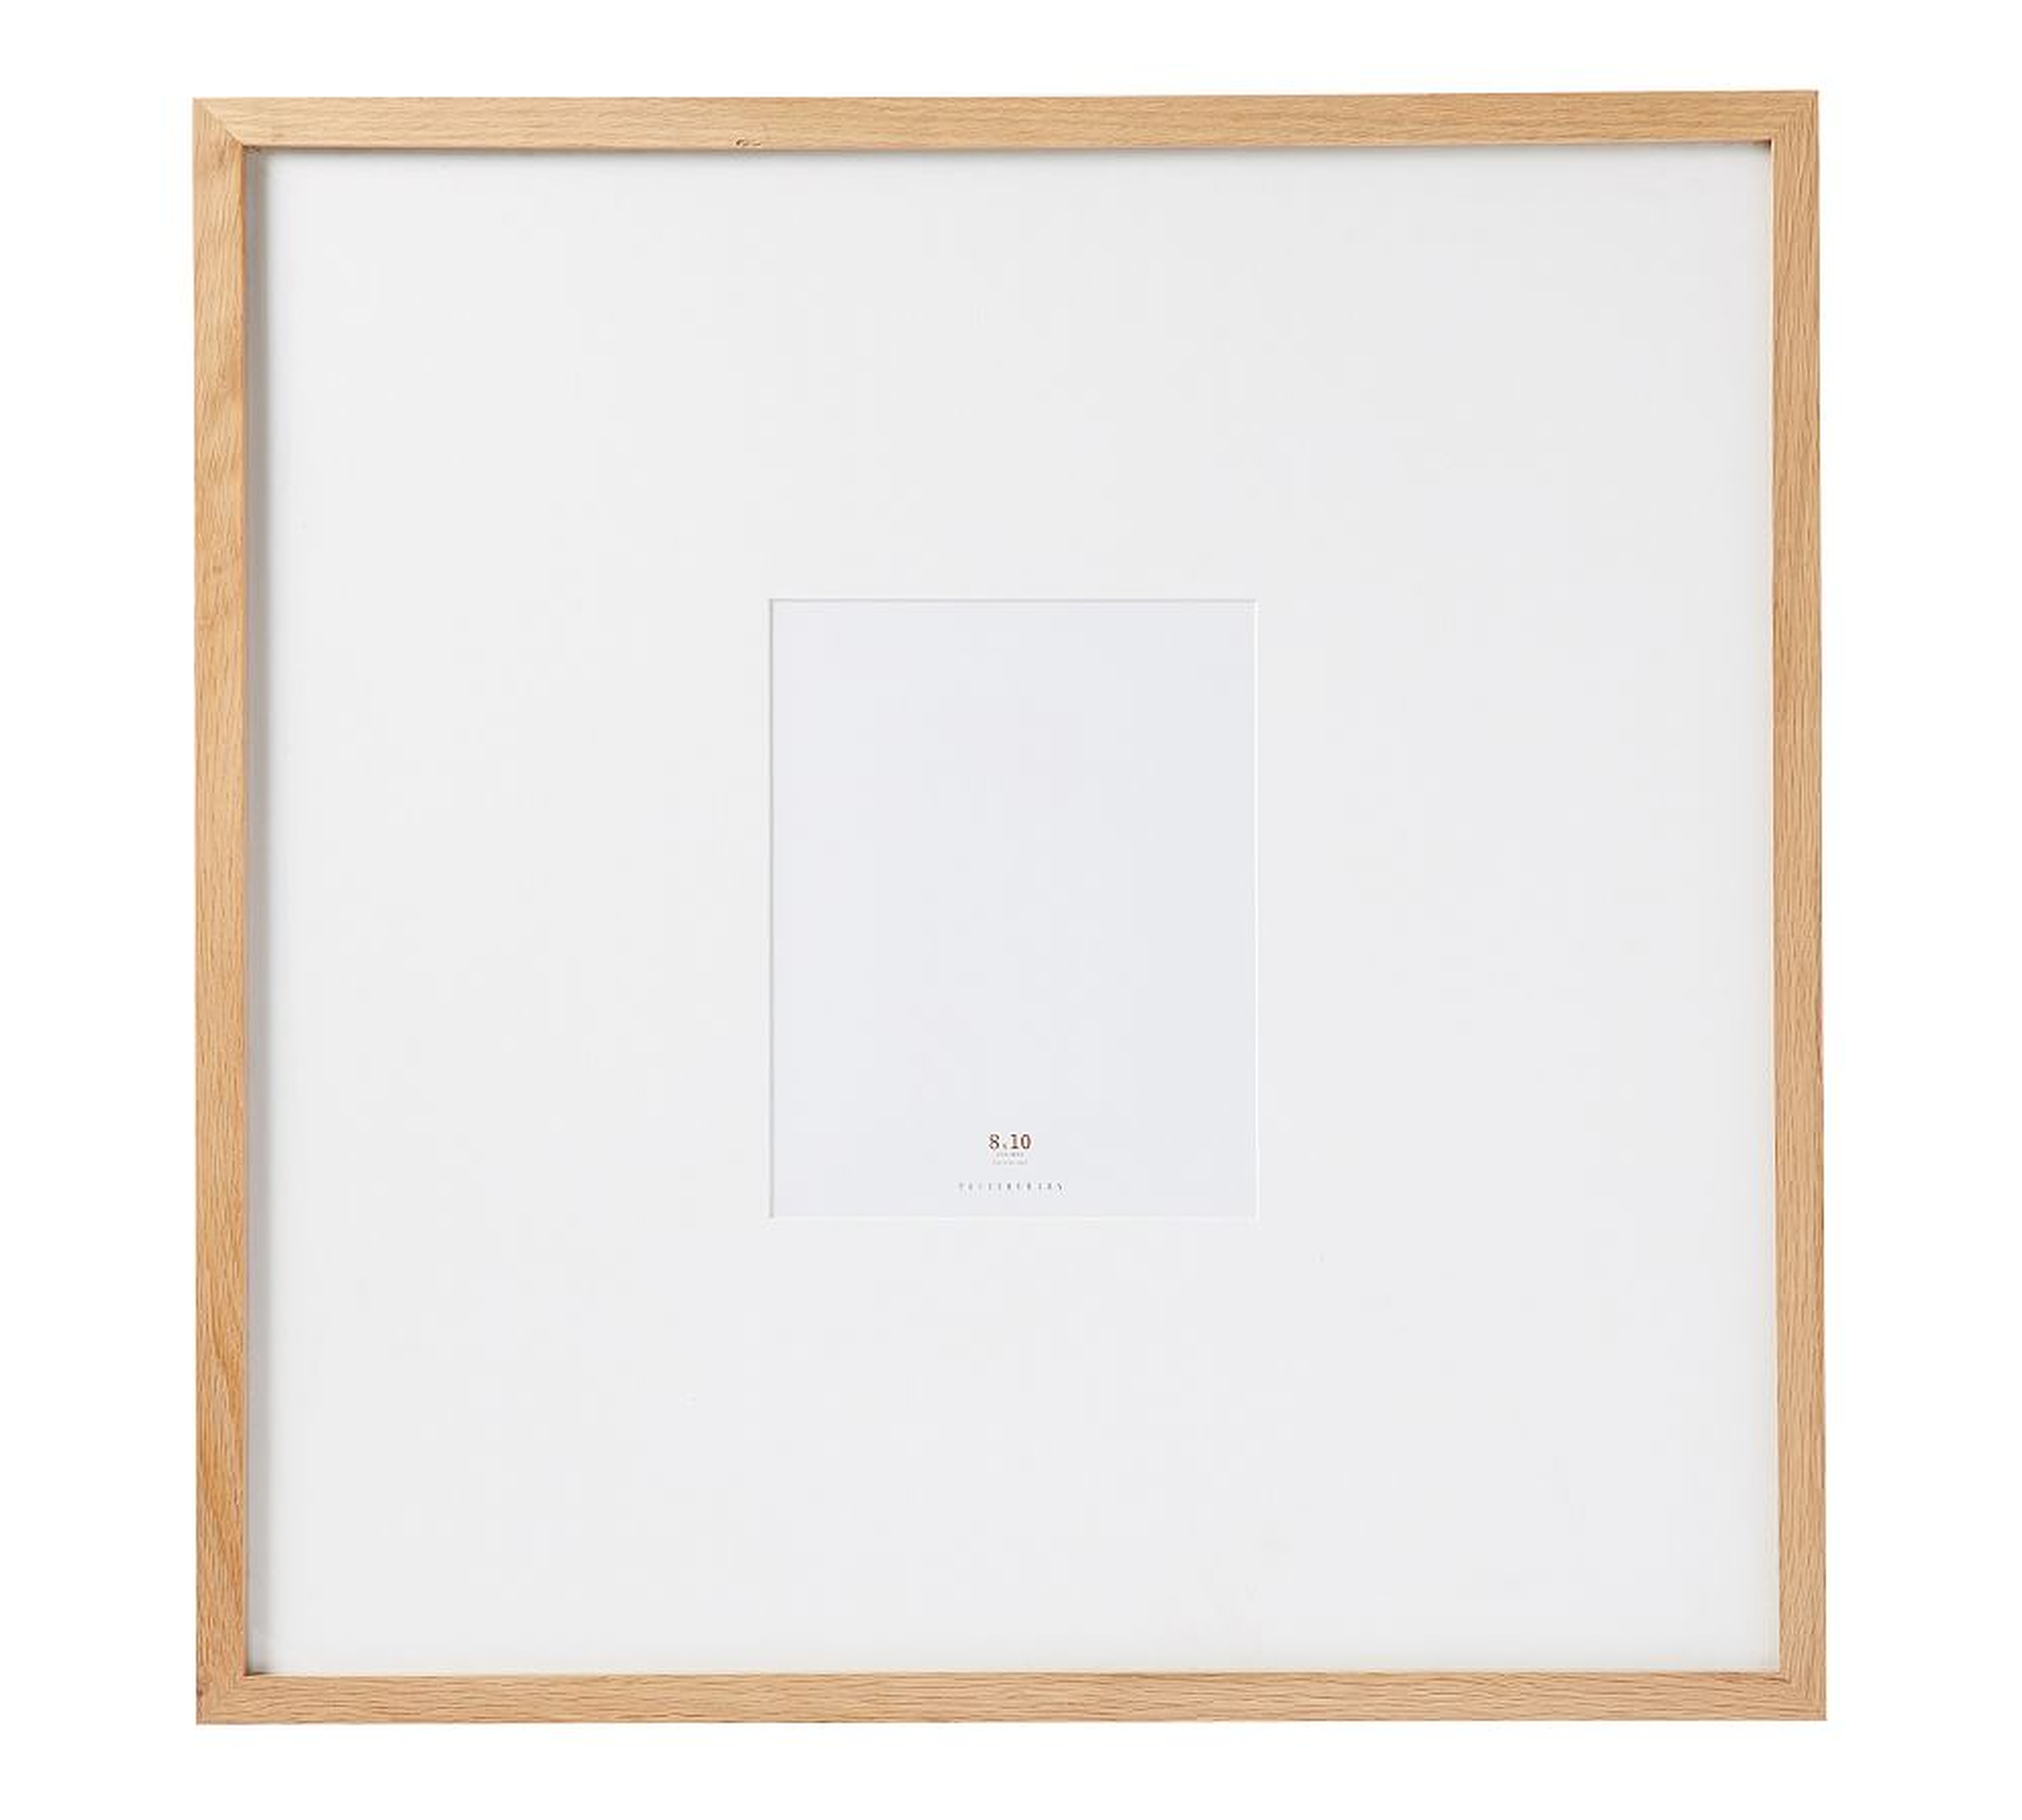 Wood Gallery Single Opening Oversized Mat Frame, 8x10 (25x25 overall) - Natural - Pottery Barn